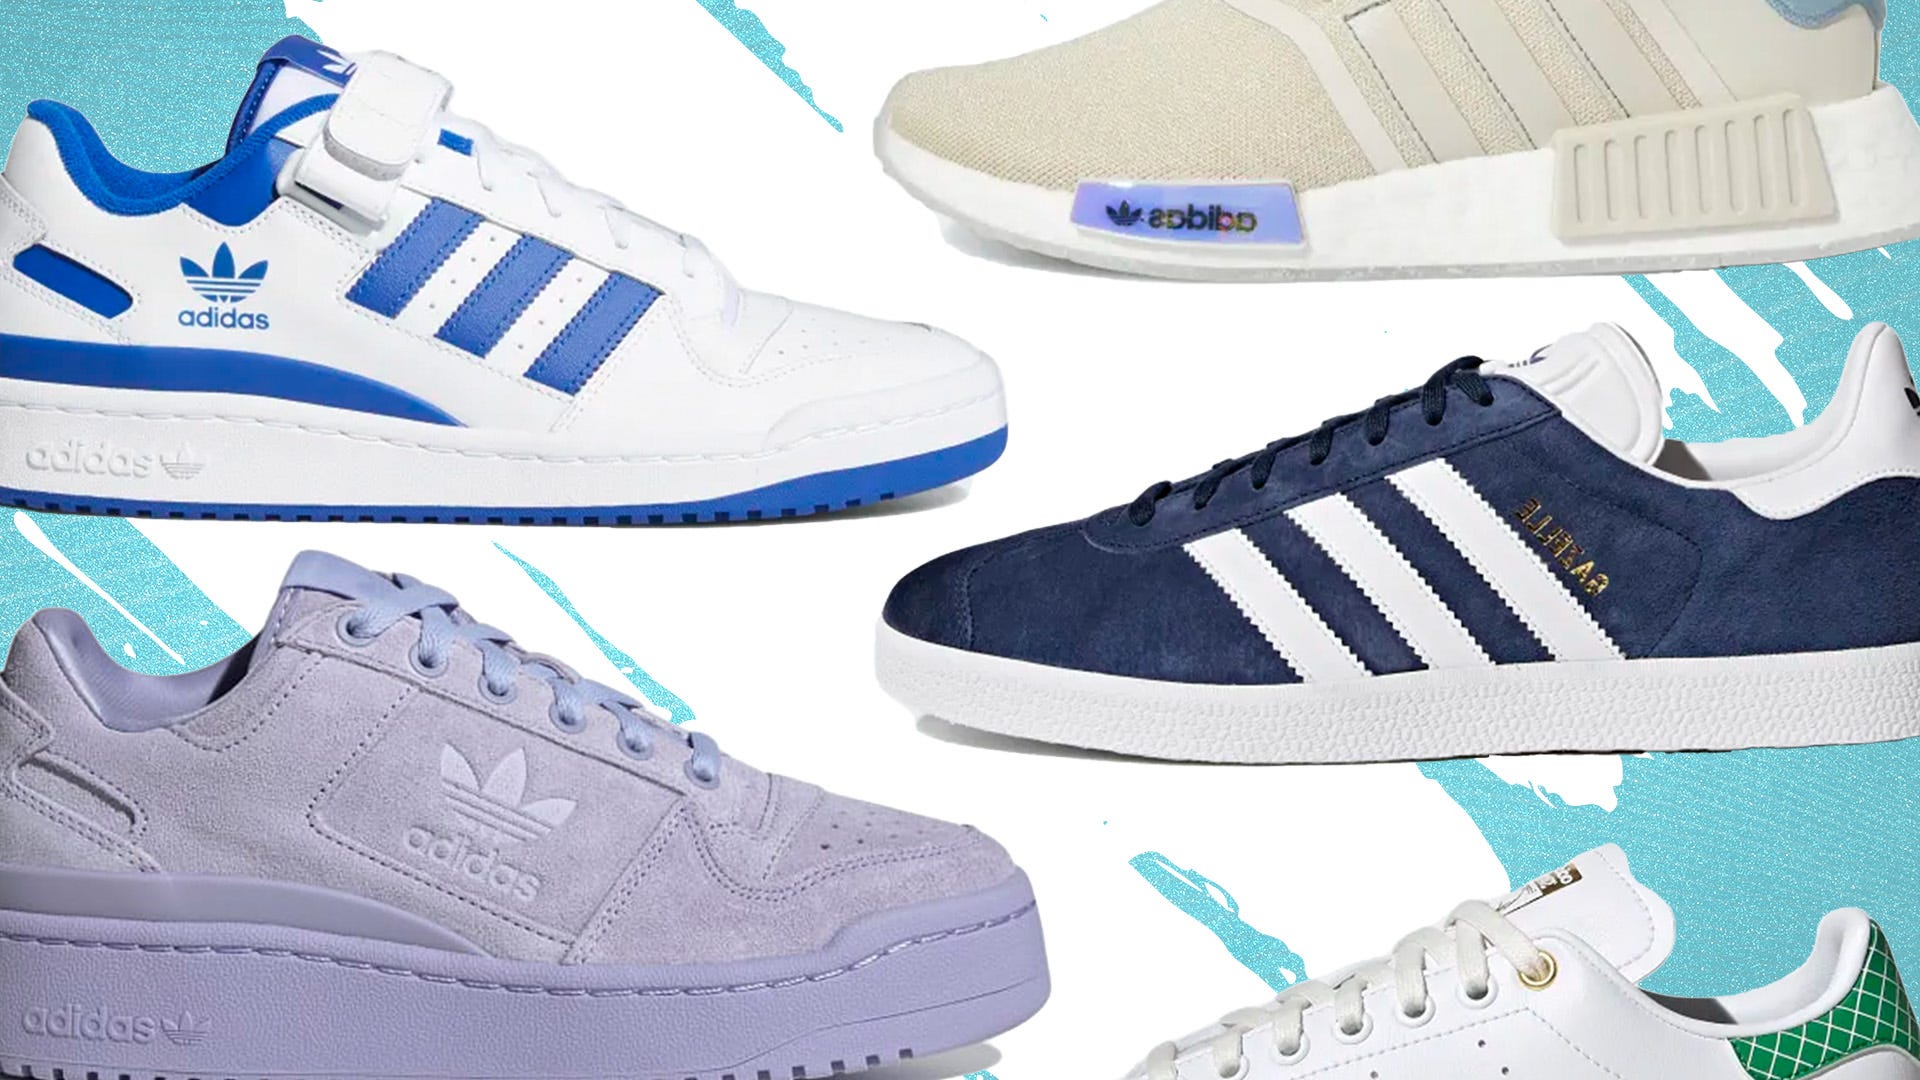 adidas shoes - buy adidas shoes for men & women online | superbalist